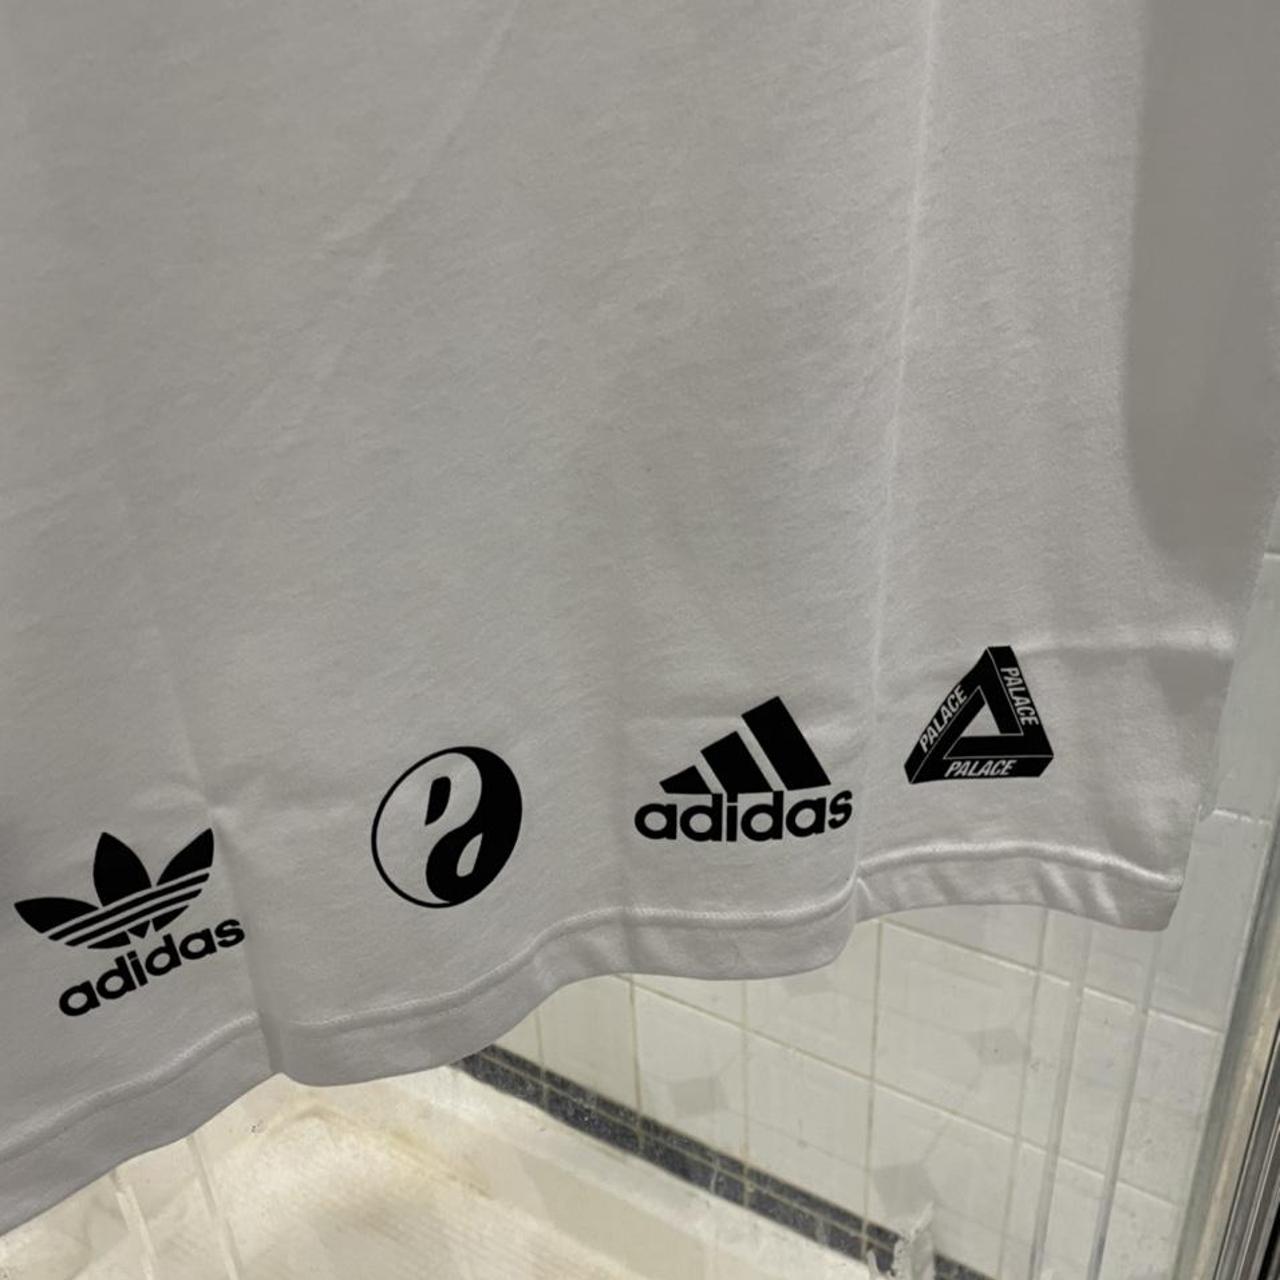 Adidas X Palace Wellness Tee In White Deadstock... - Depop